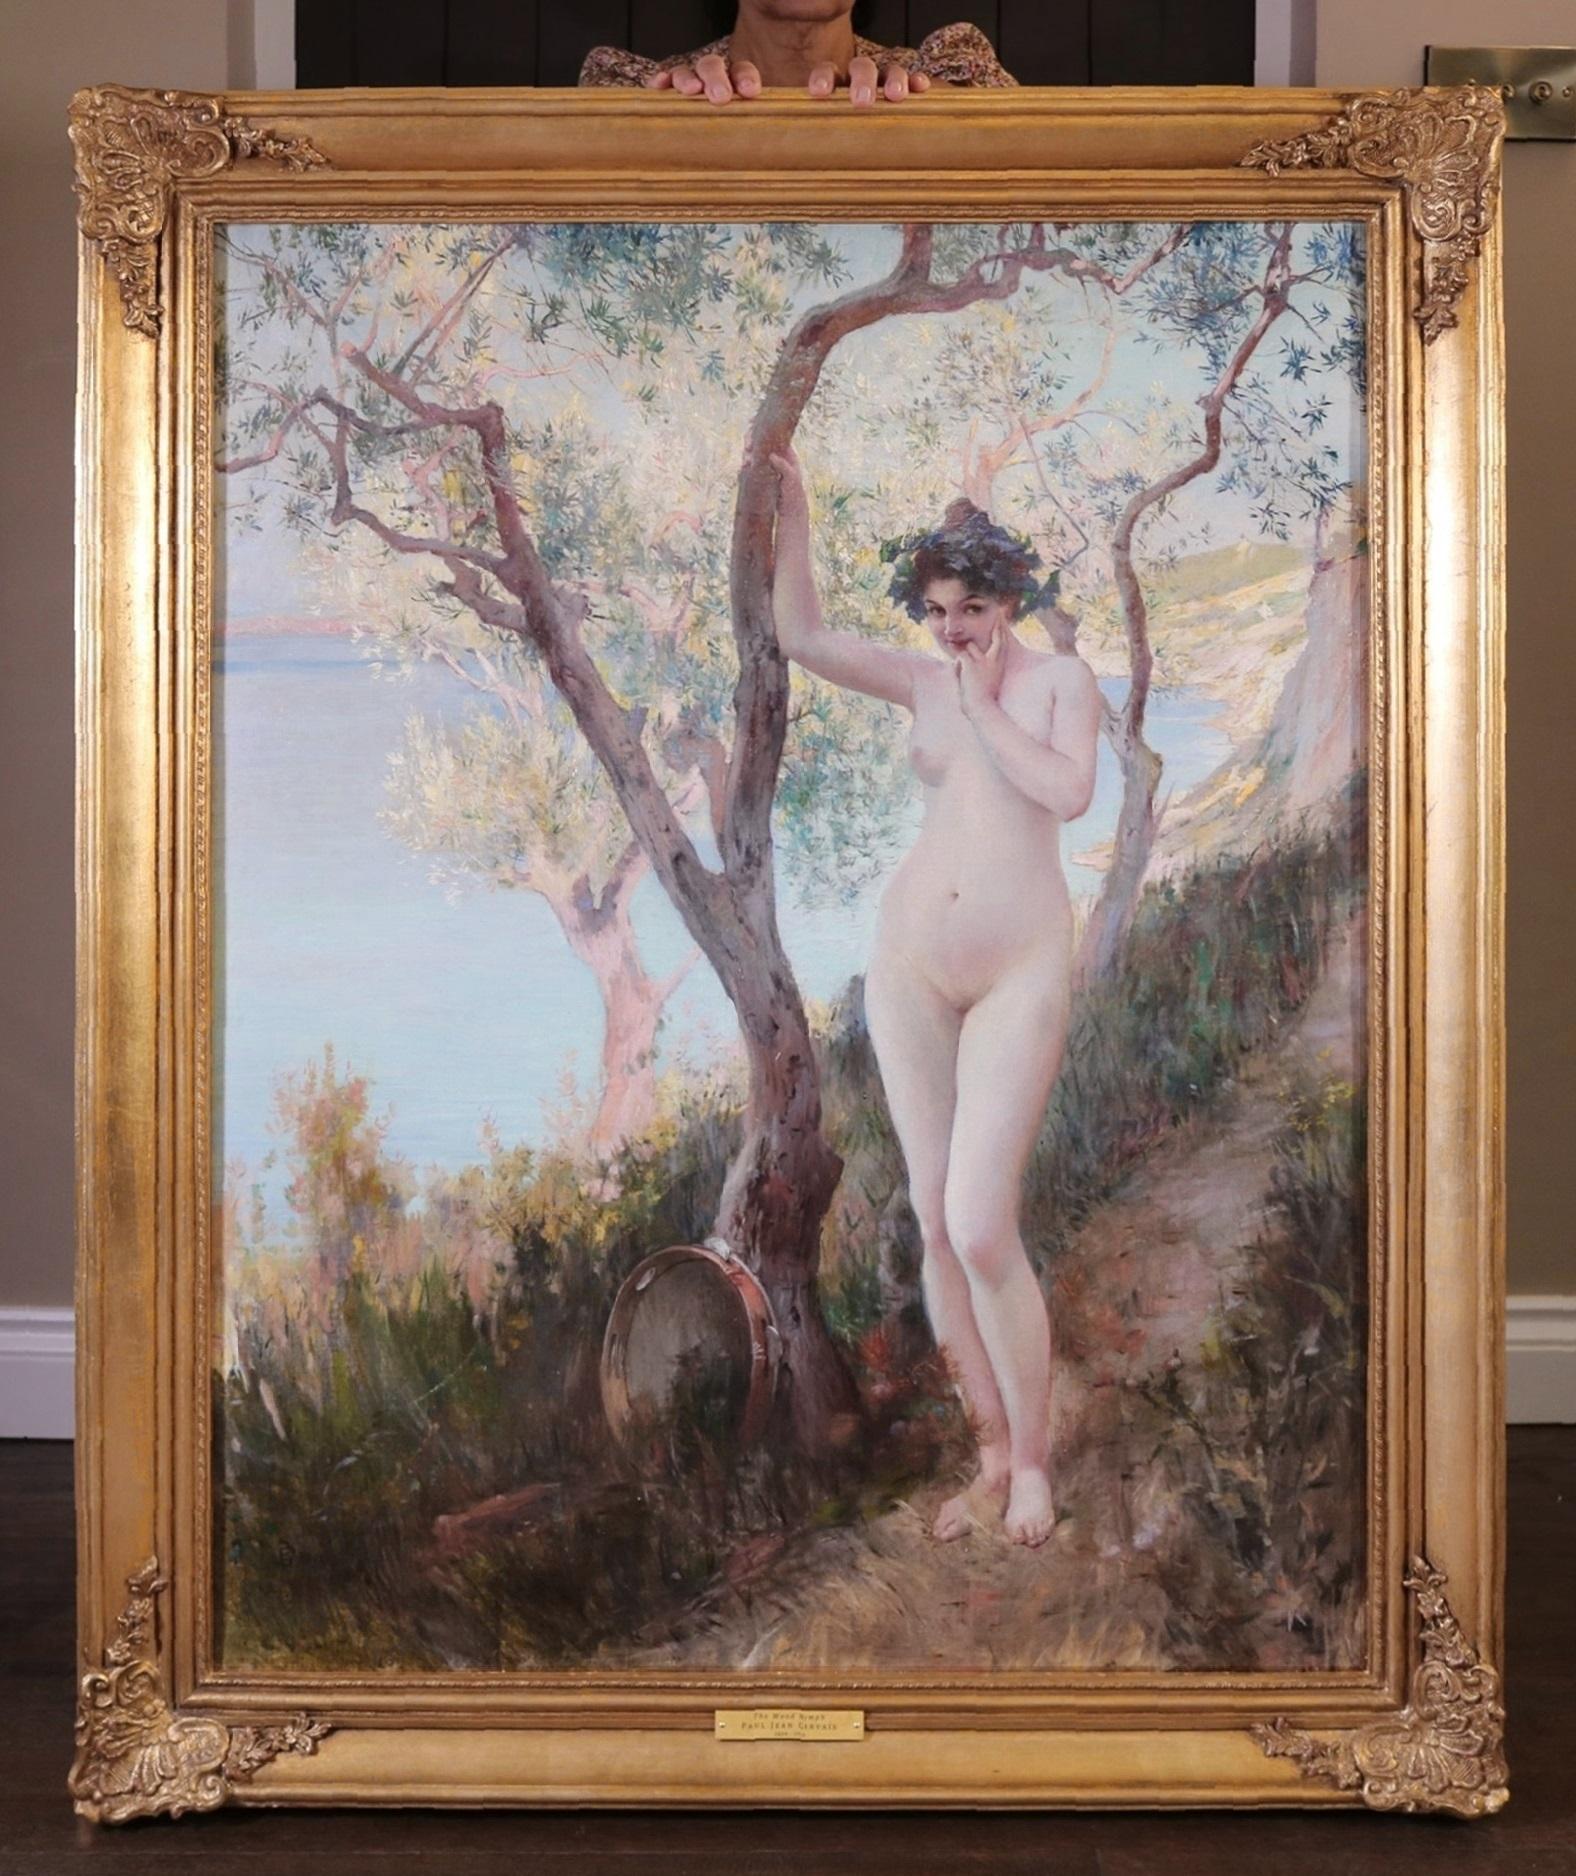 Paul-Jean-Louis Gervais Nude Painting - The Wood Nymph - Large 19th Century French Post Impressionist Nude Portrait 